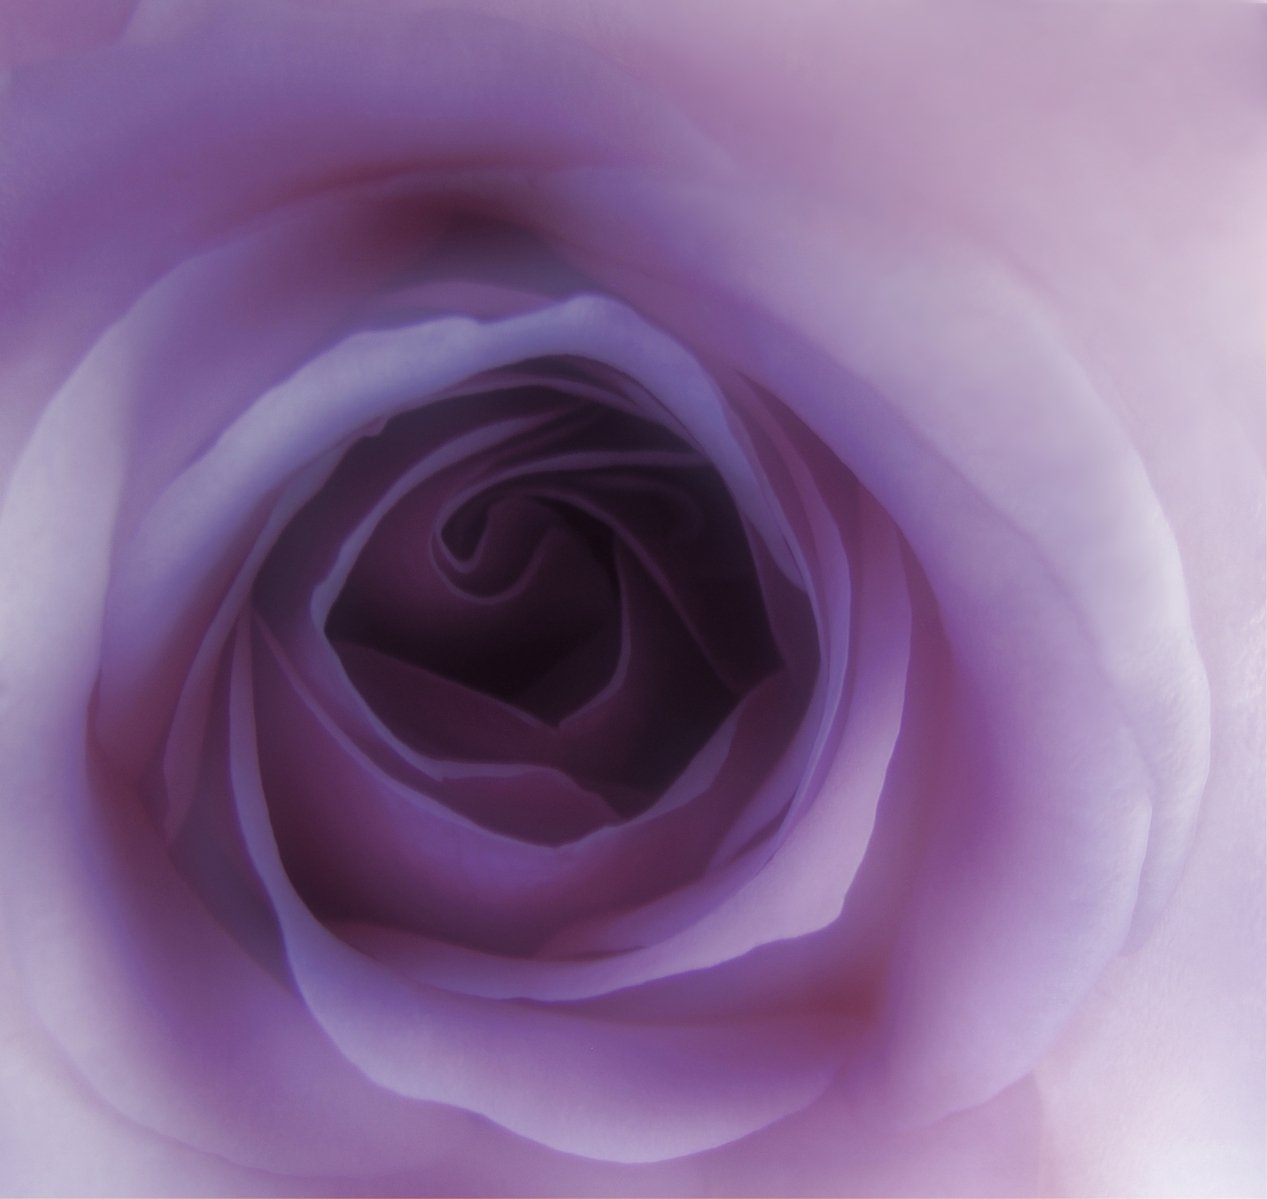 the image of a rose is very blurry